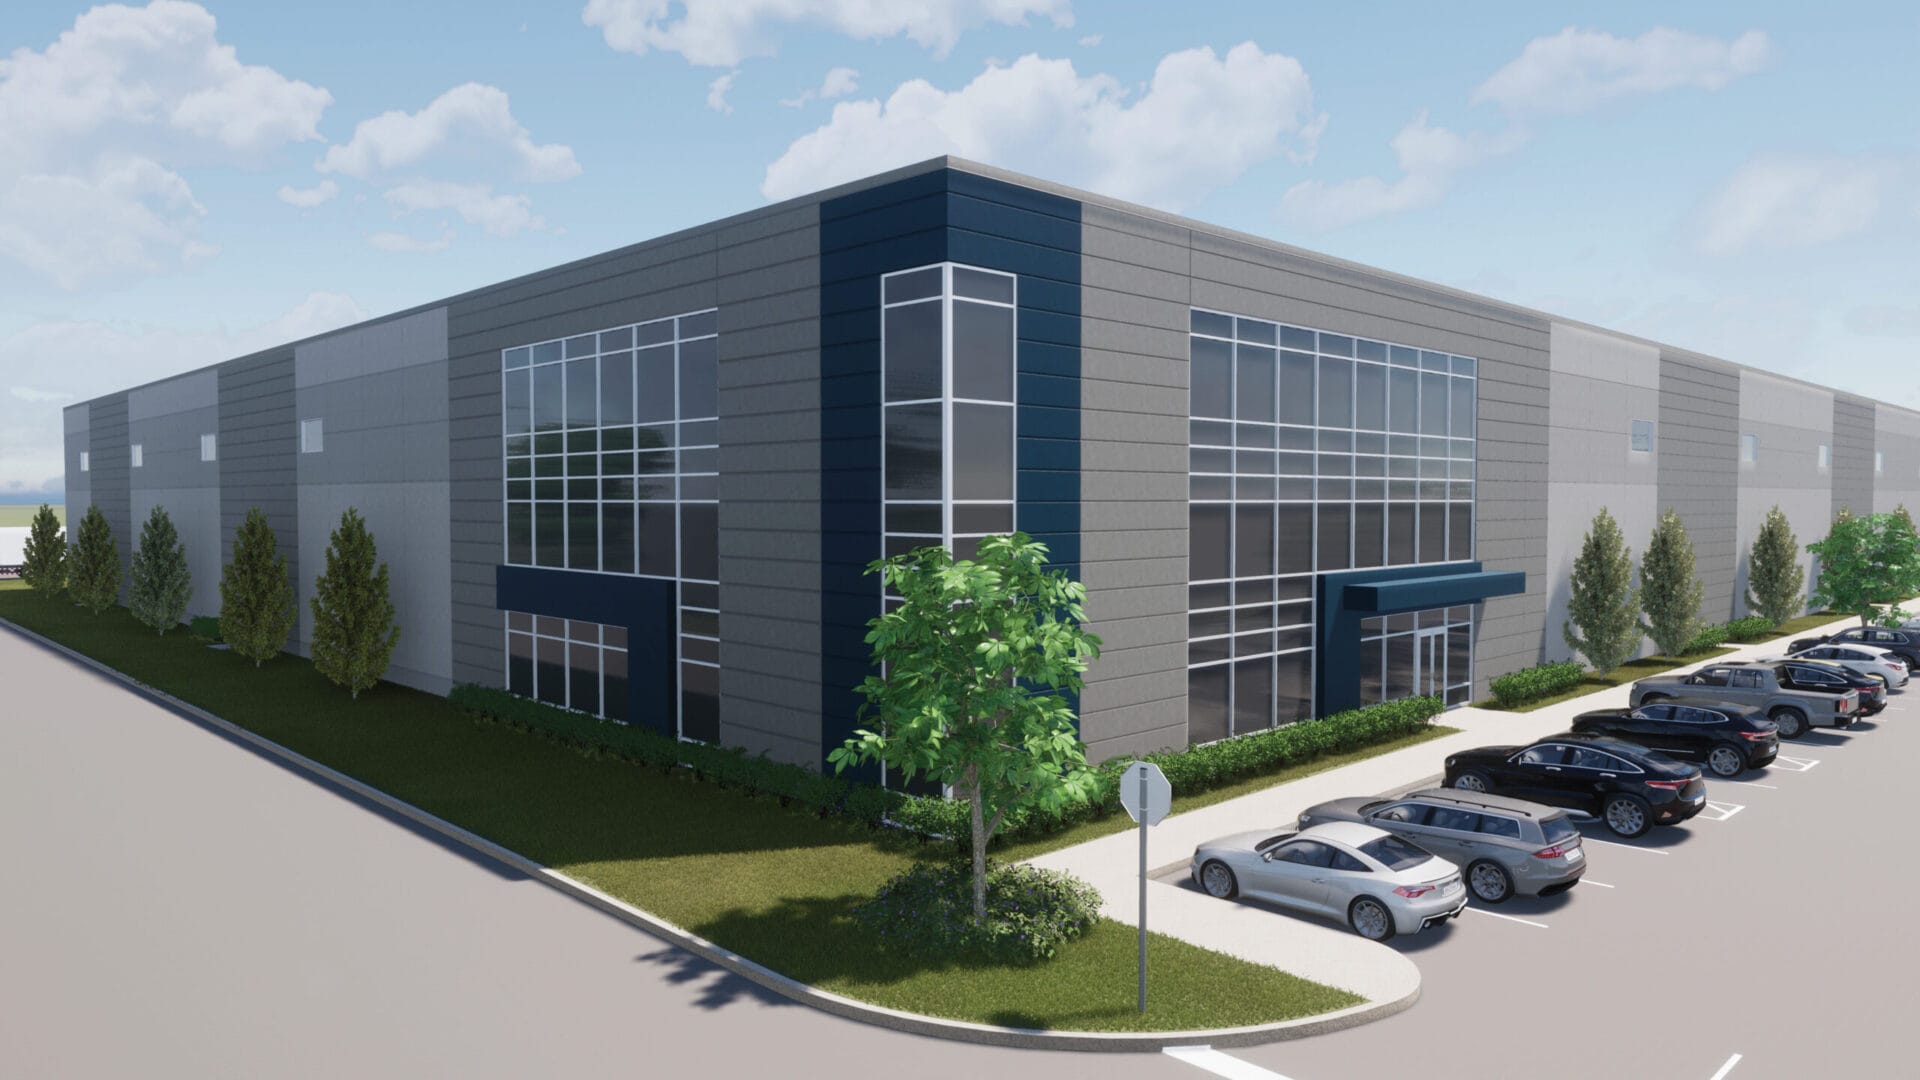 Colliers & Bridge Industrial Partner to Lease 1M SF of Industrial Space in Perth Amboy